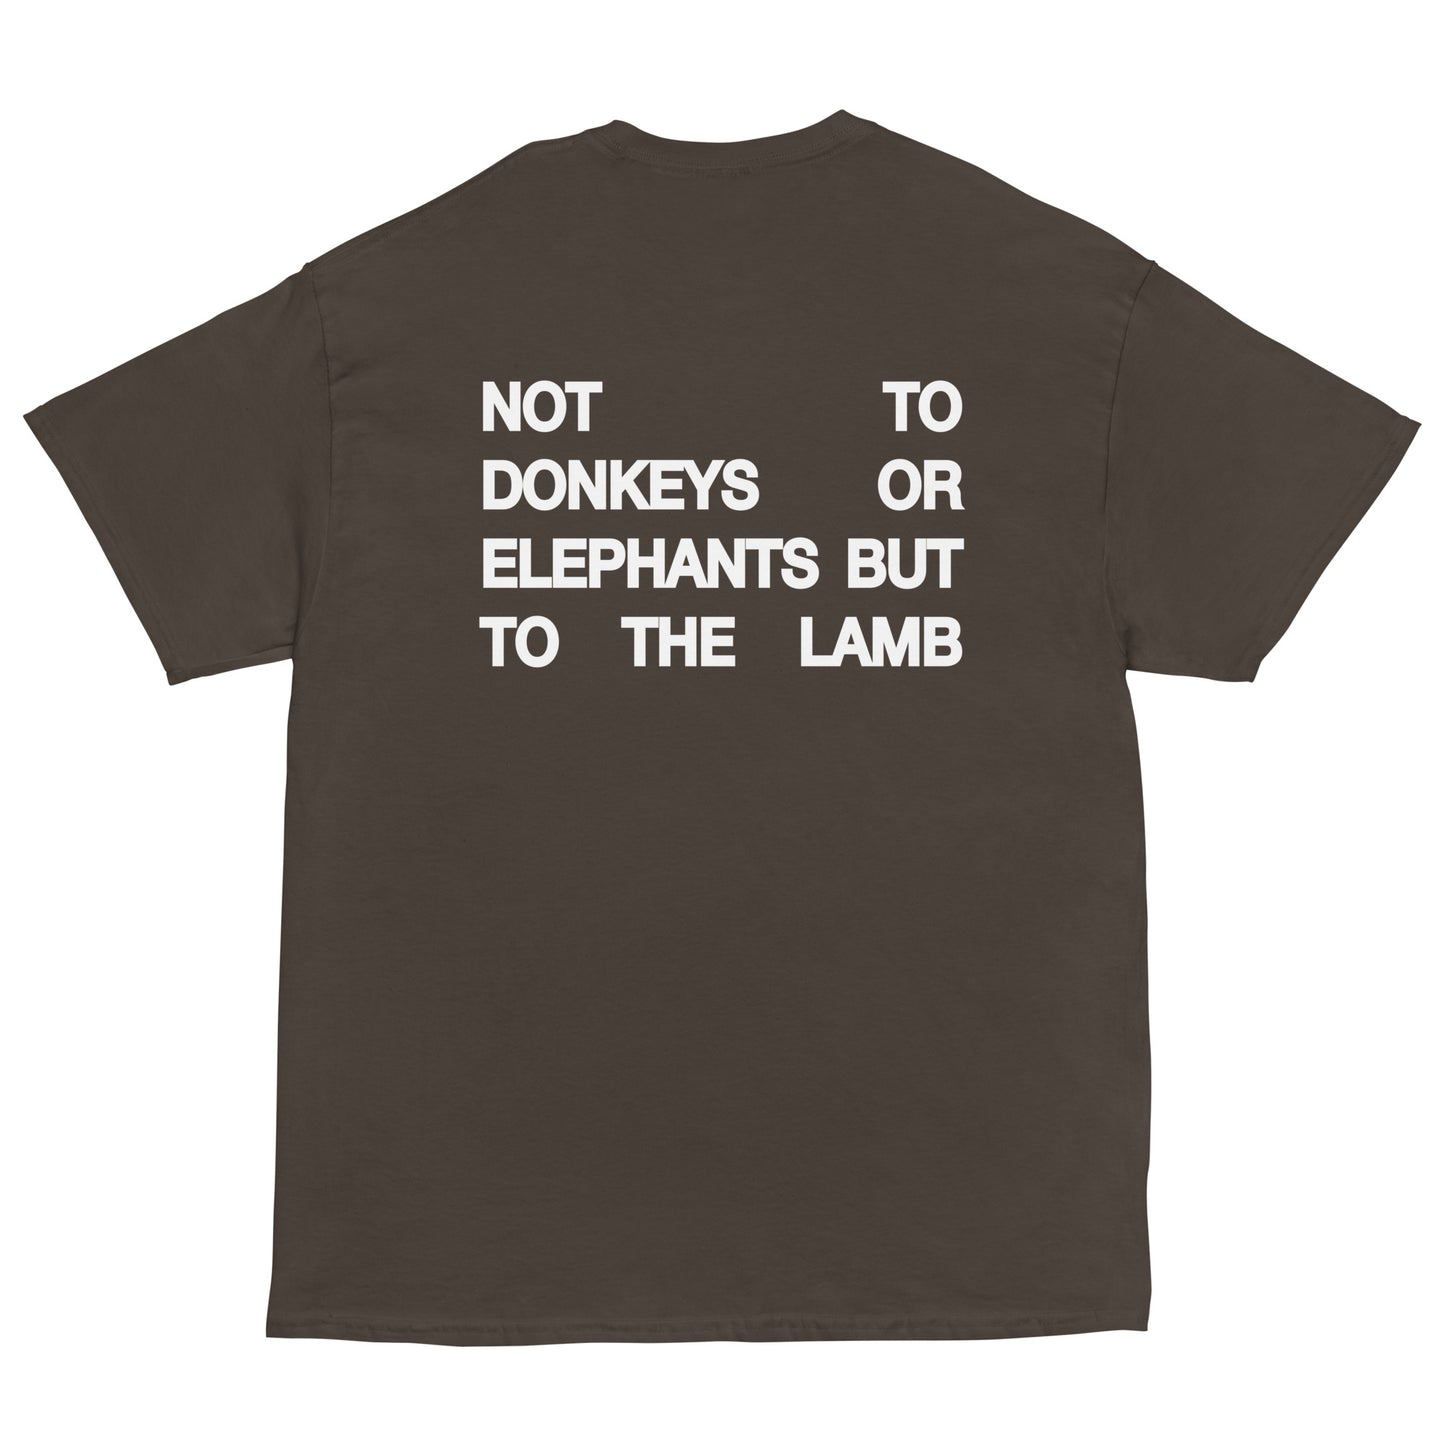 To the Lamb T